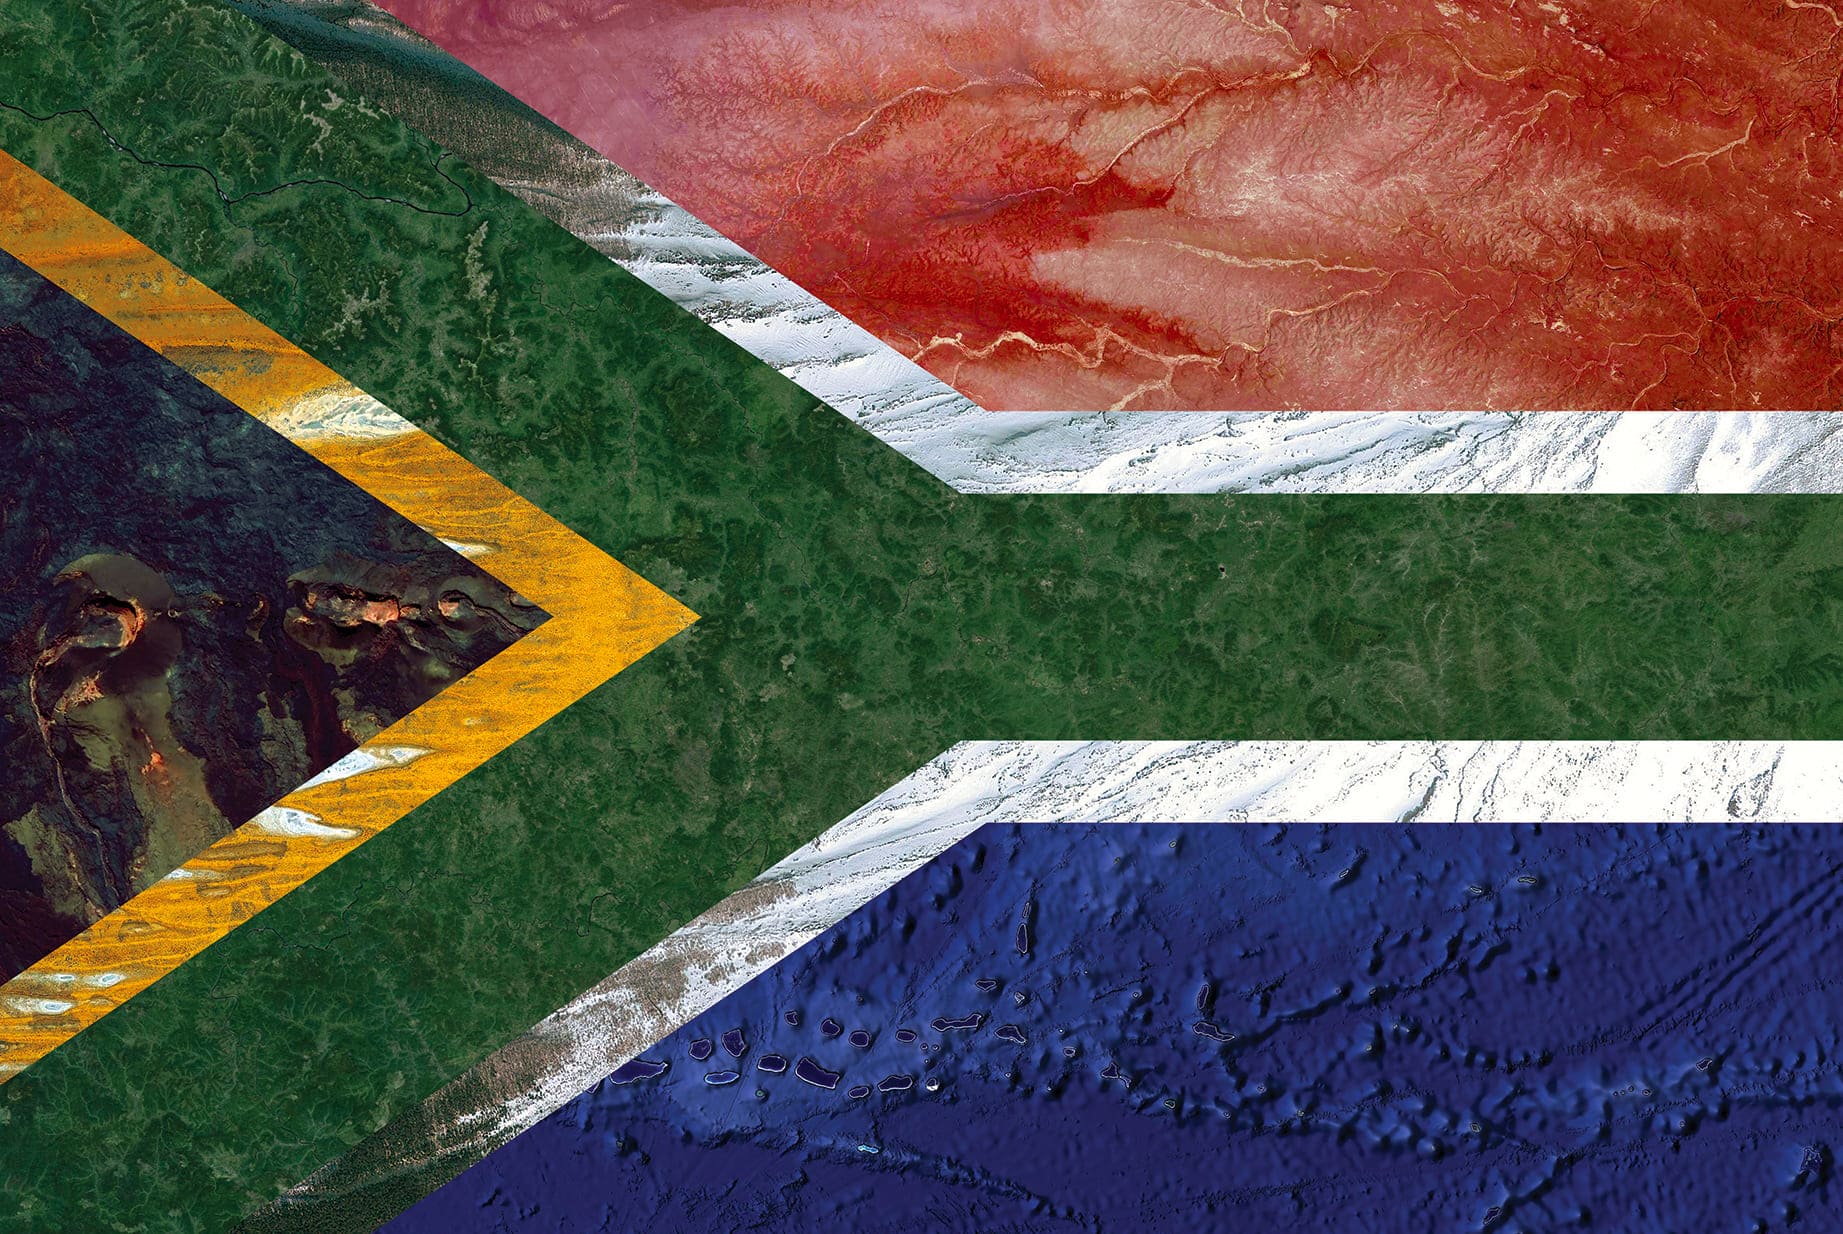 SOUTH AFRICA EARTH FLAG, 2016, DIGITAL COLLAGE OF SATELLITE PHOTOGRAPHY FROM HAWAII, AUSTRALIA, RUSSIA, JAPAN, IRAQ, OCEANIA, diasec print CM 67×100, limited edition 9